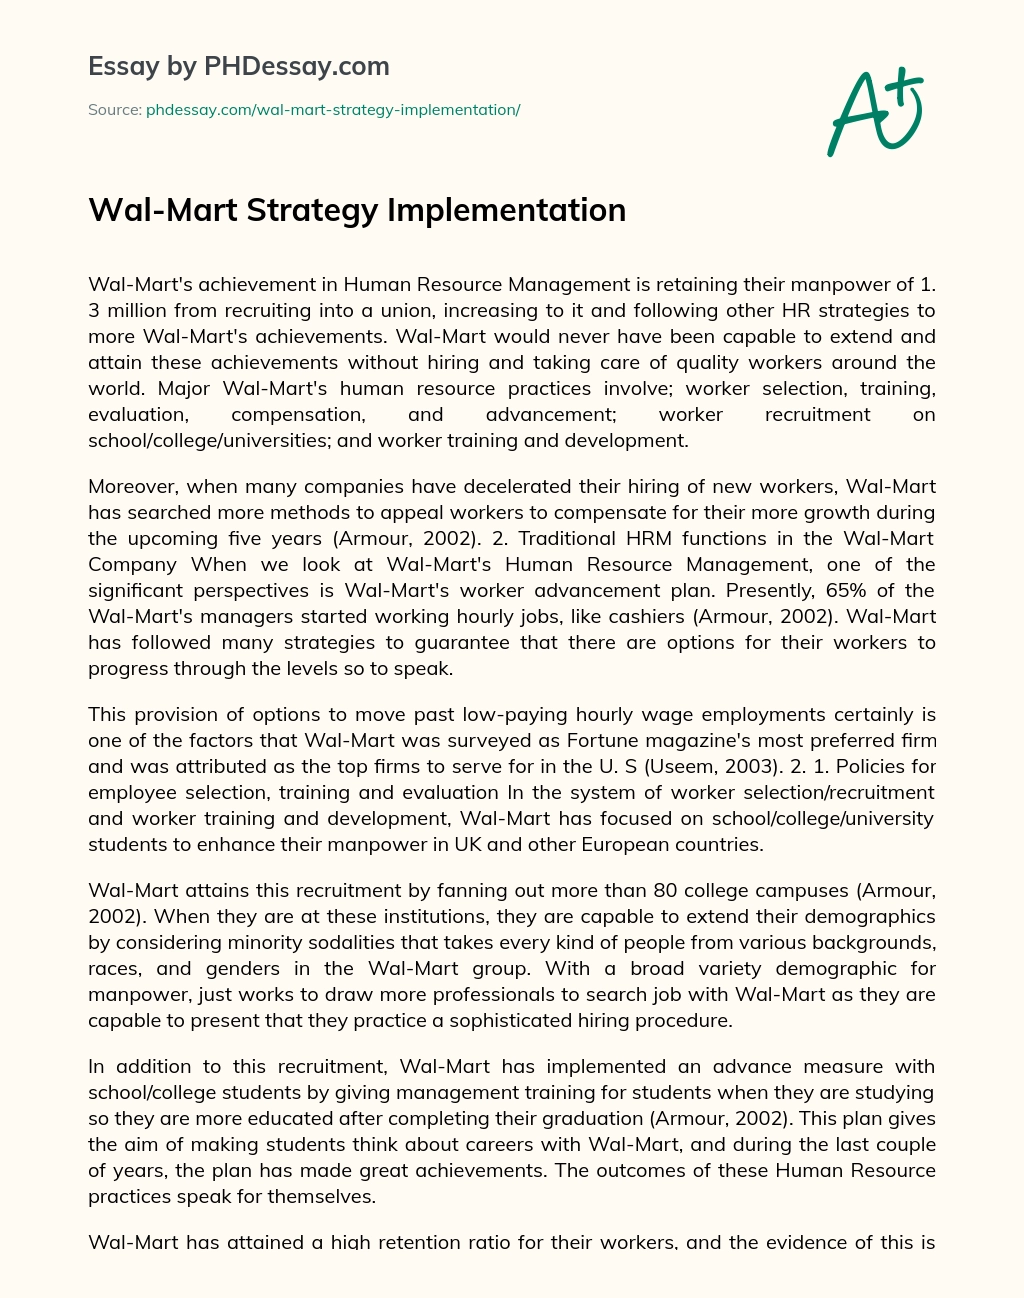 Wal-Mart Strategy Implementation essay